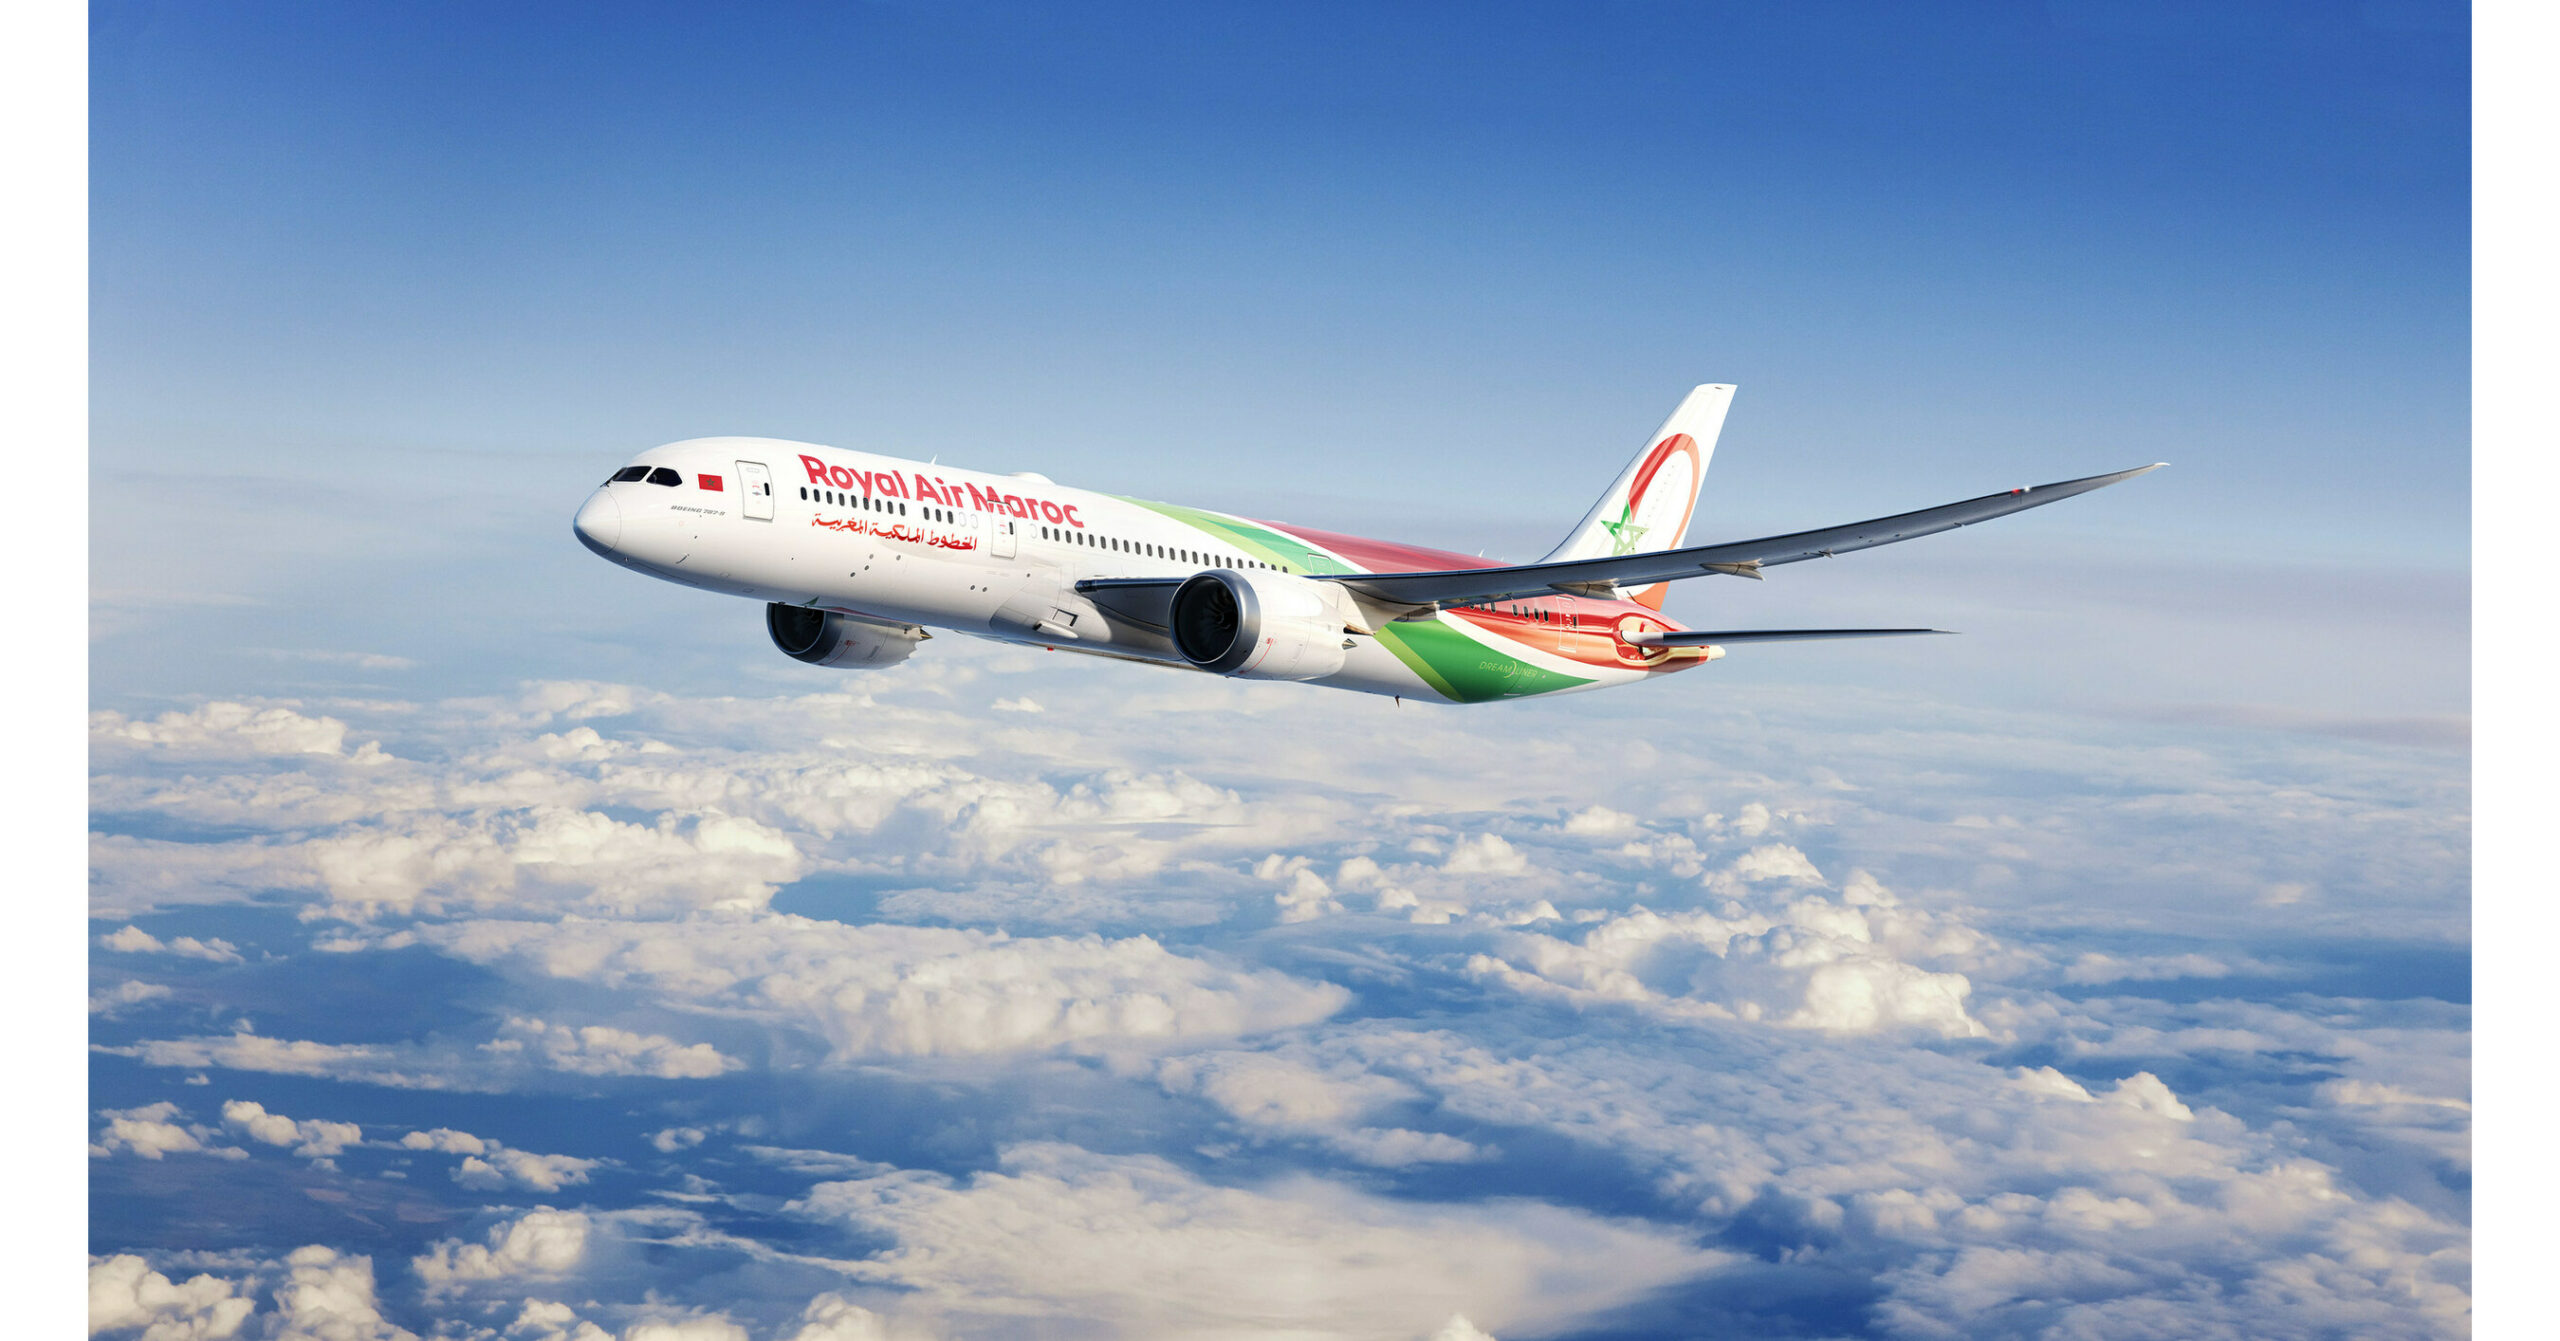 Boeing confirms Morocco’s purchase order of two Dreamliners